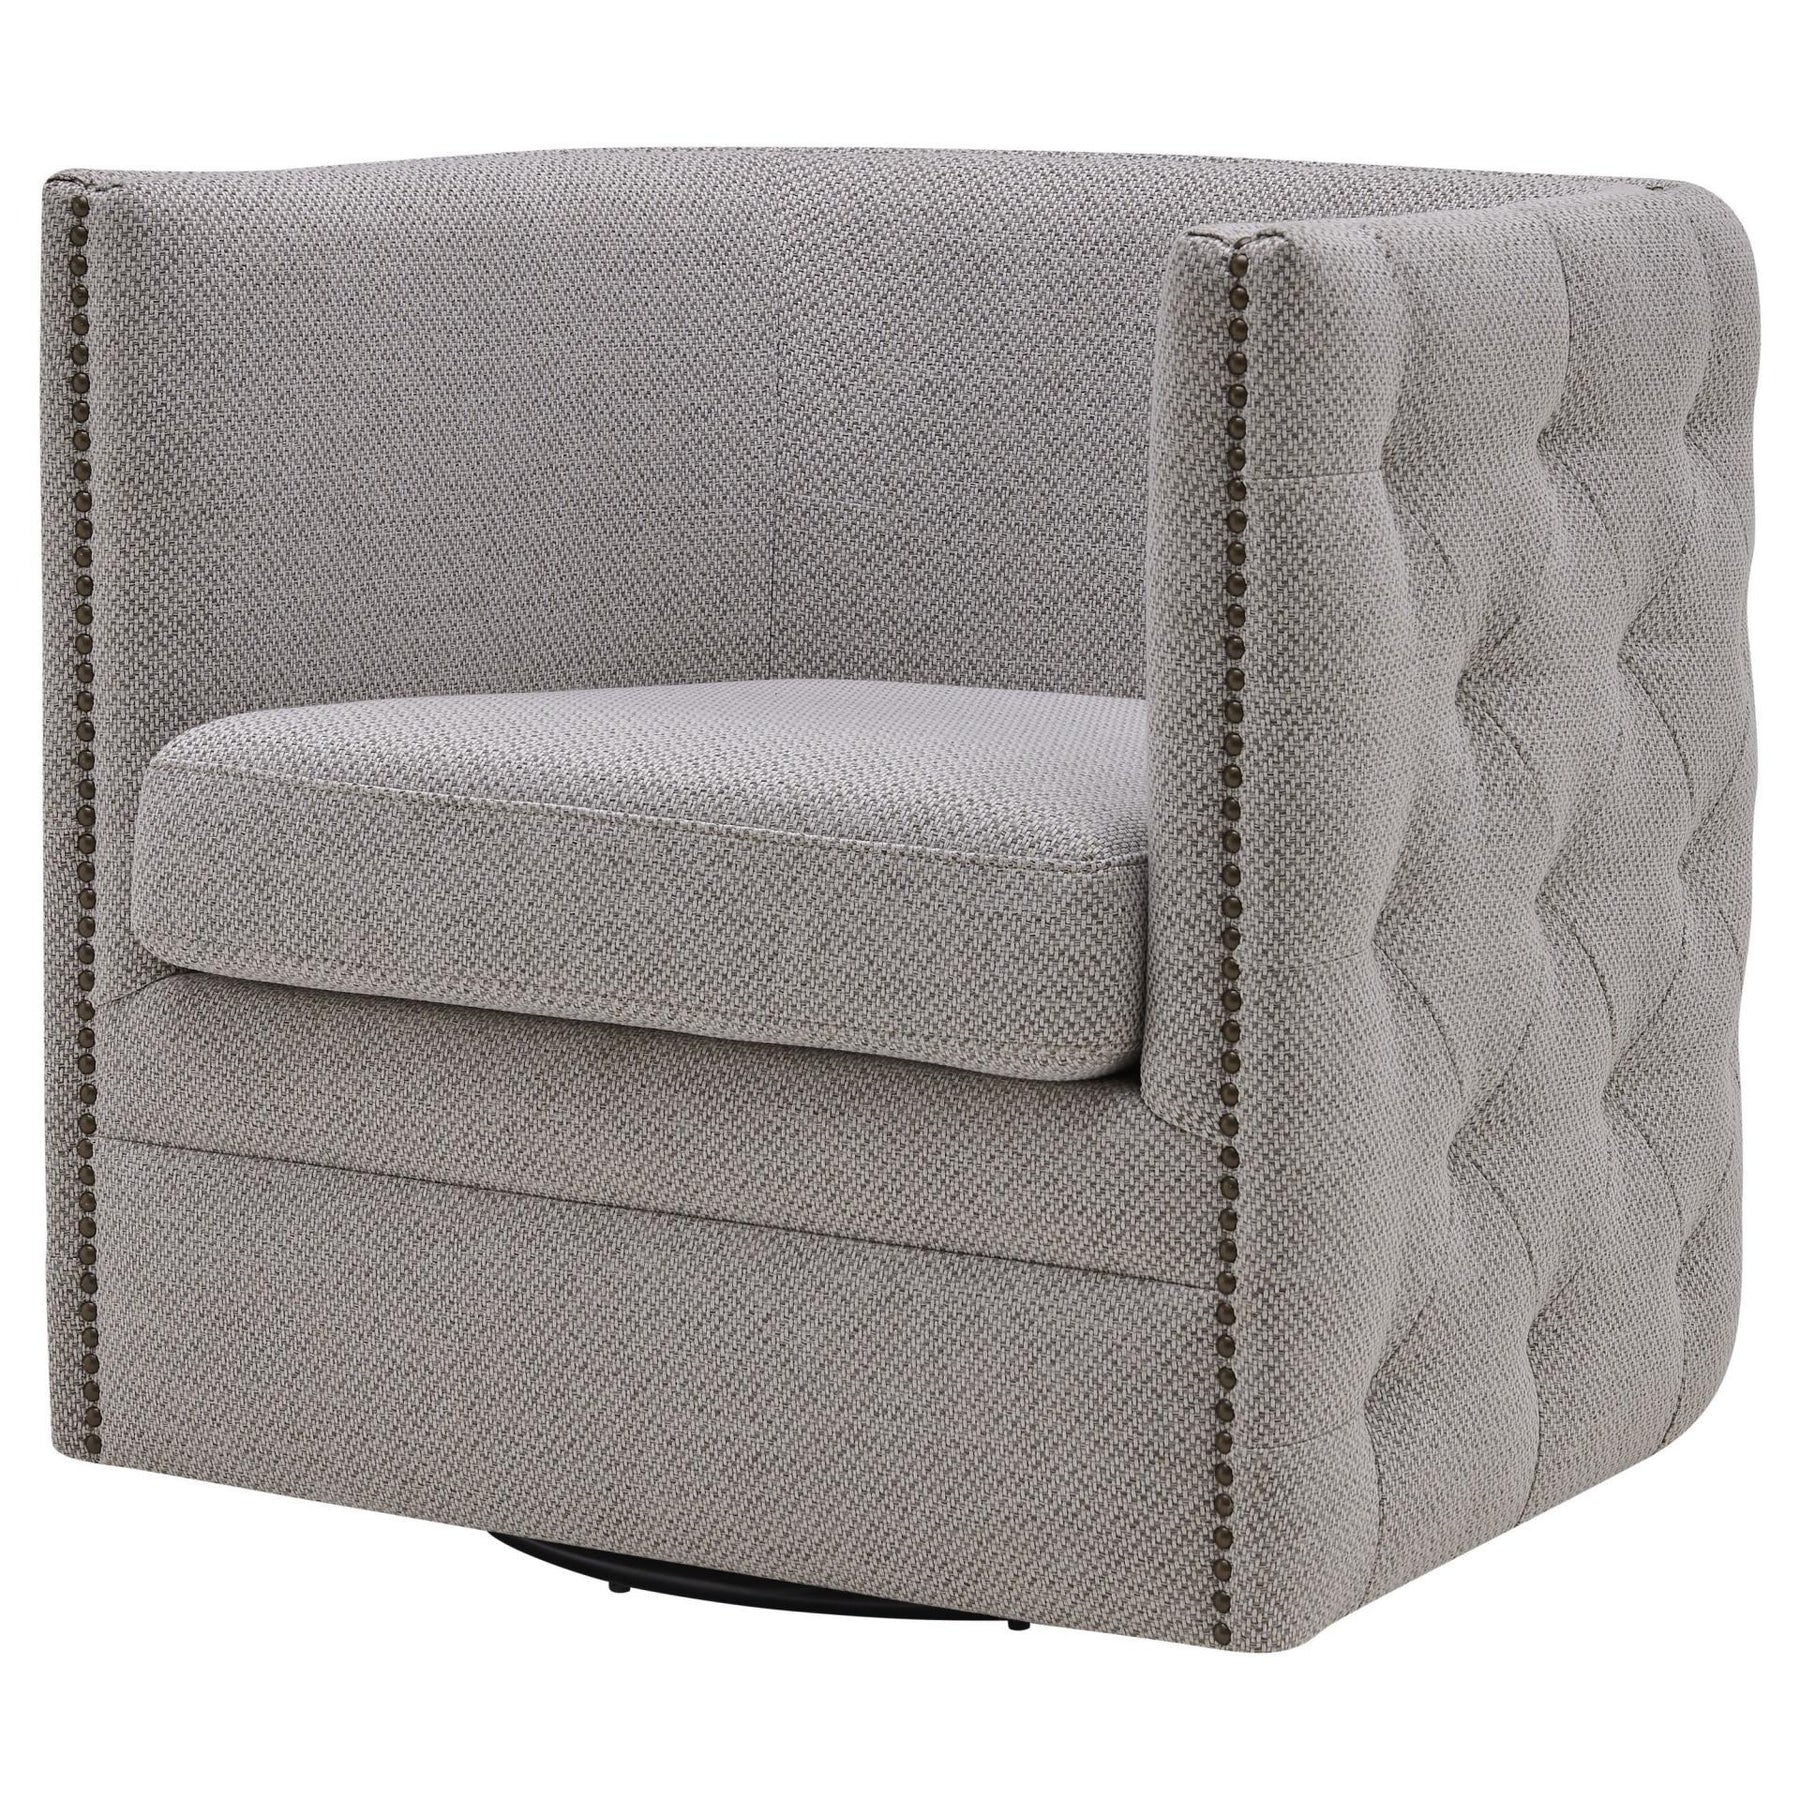 Leslie Fabric Swivel Tufted Chair by New Pacific Direct - 1900148